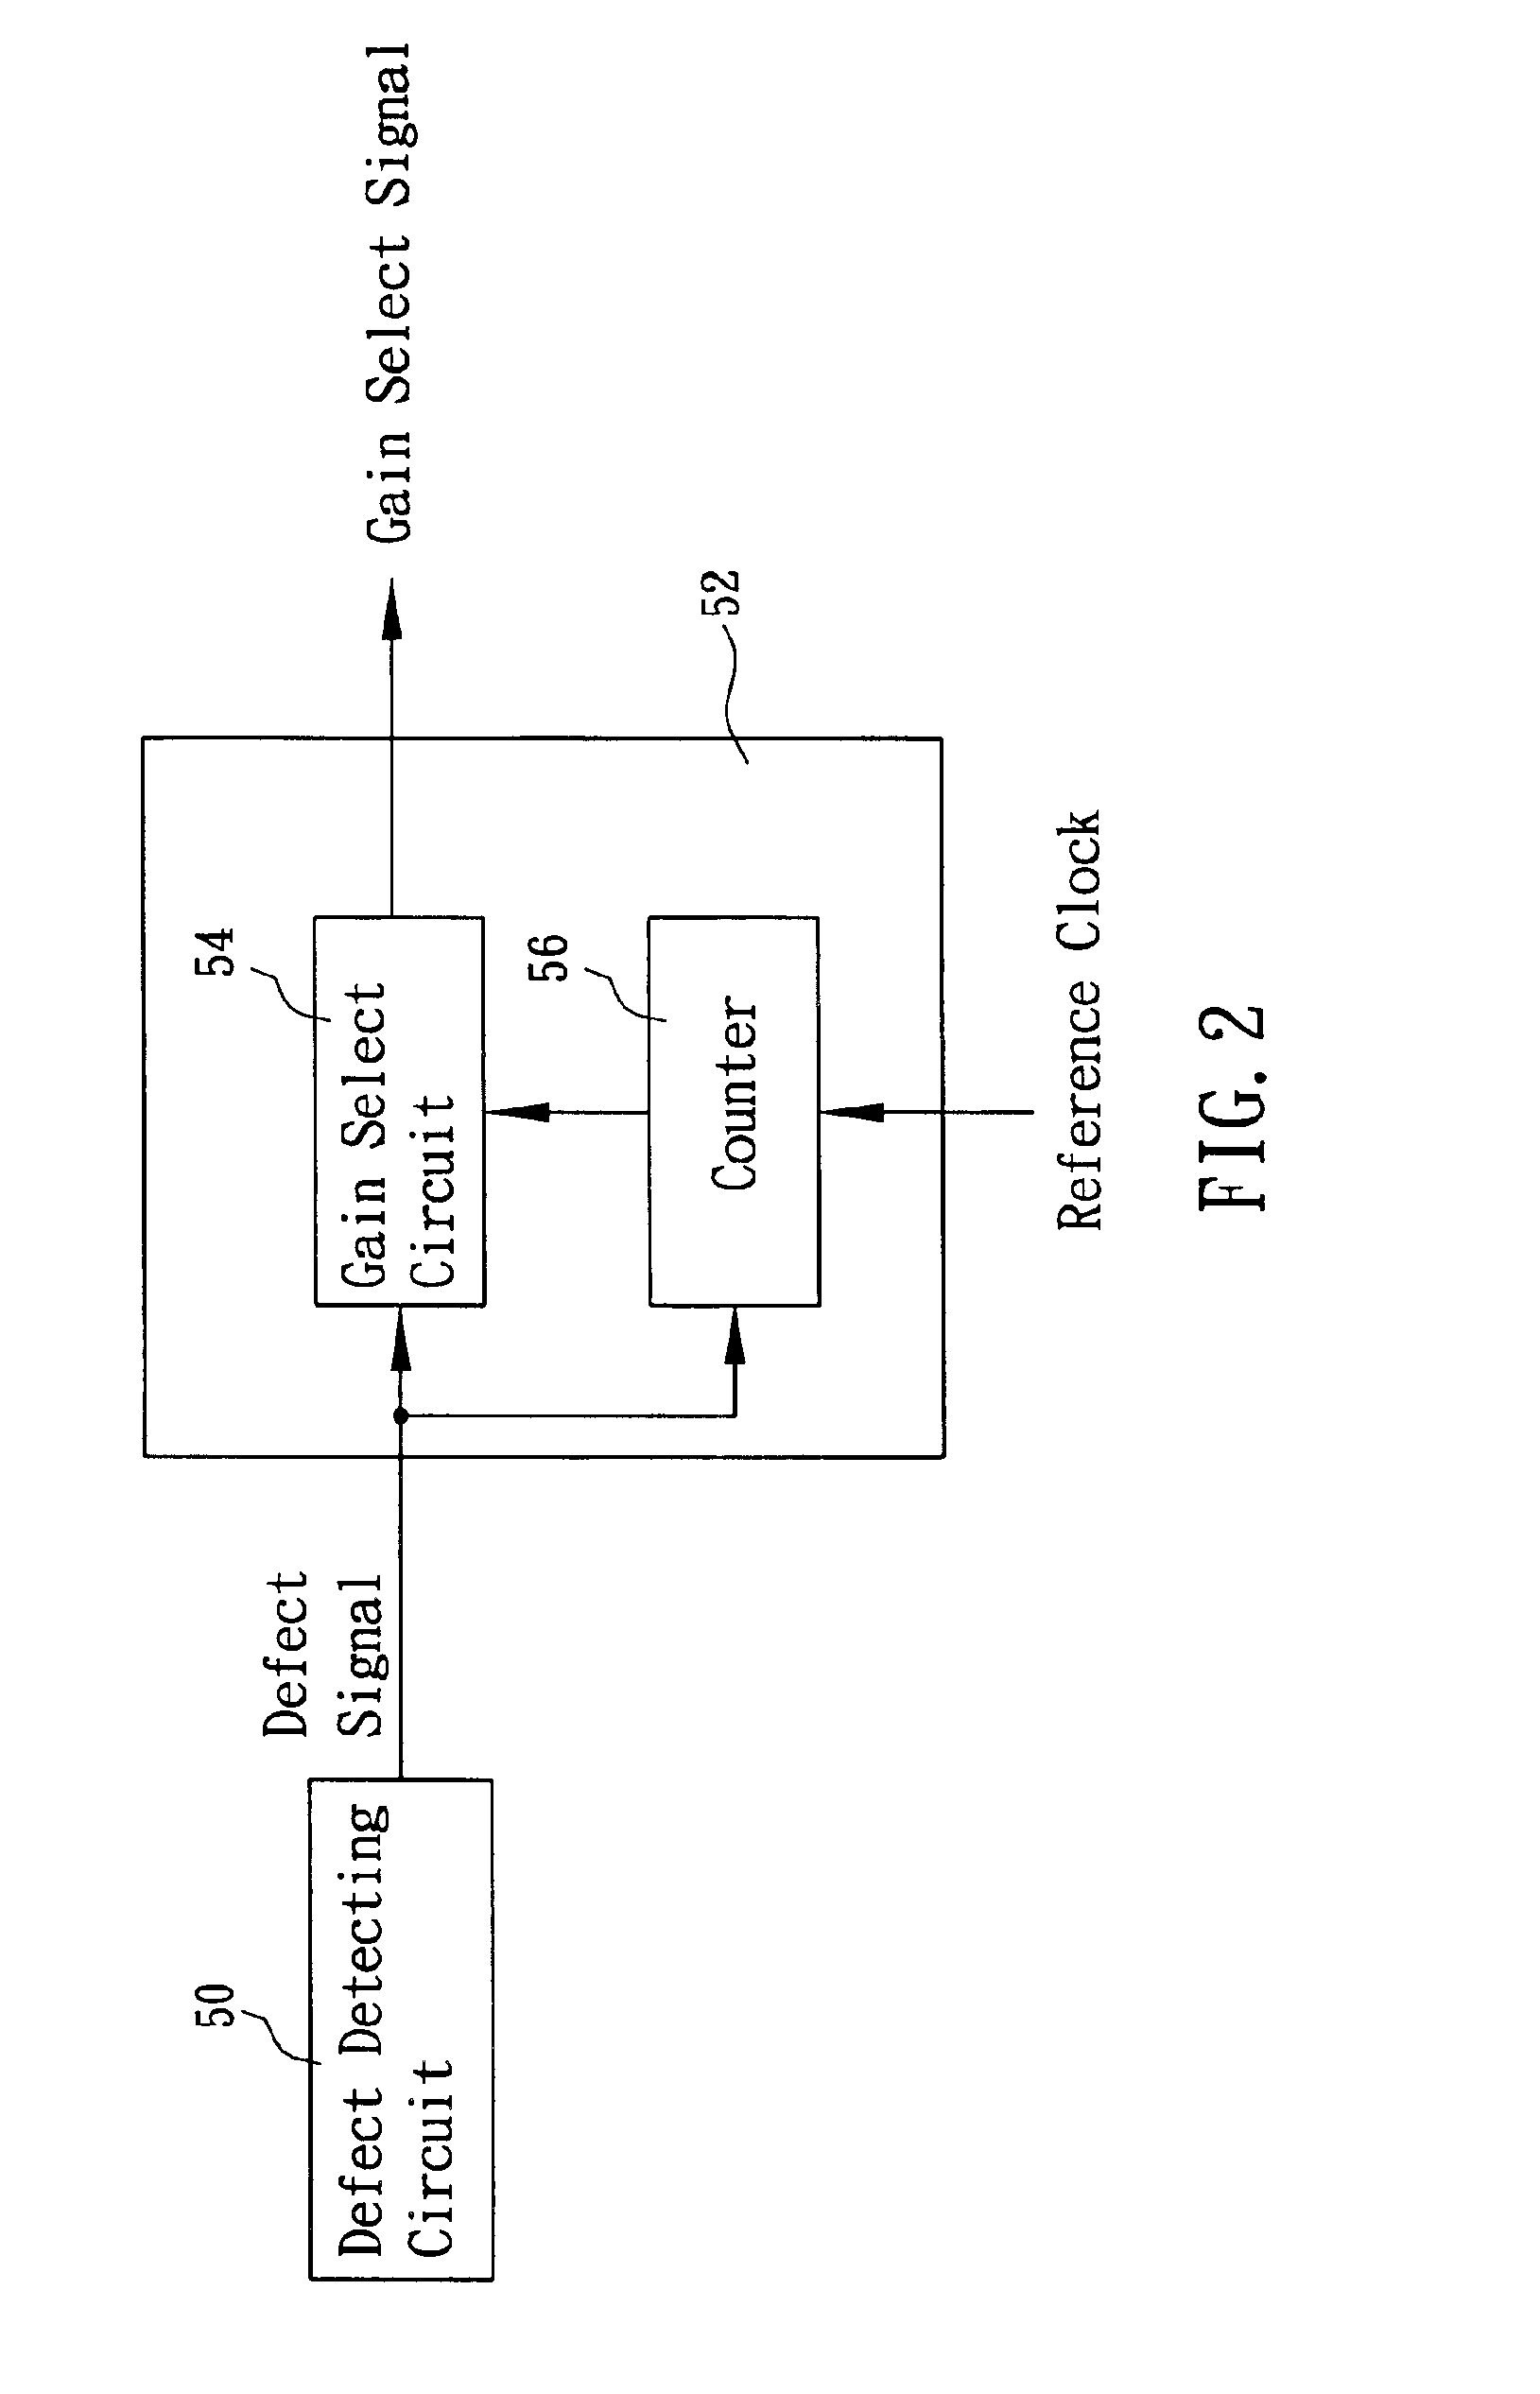 Defect protecting circuit and a method for data slicer in an optical drive